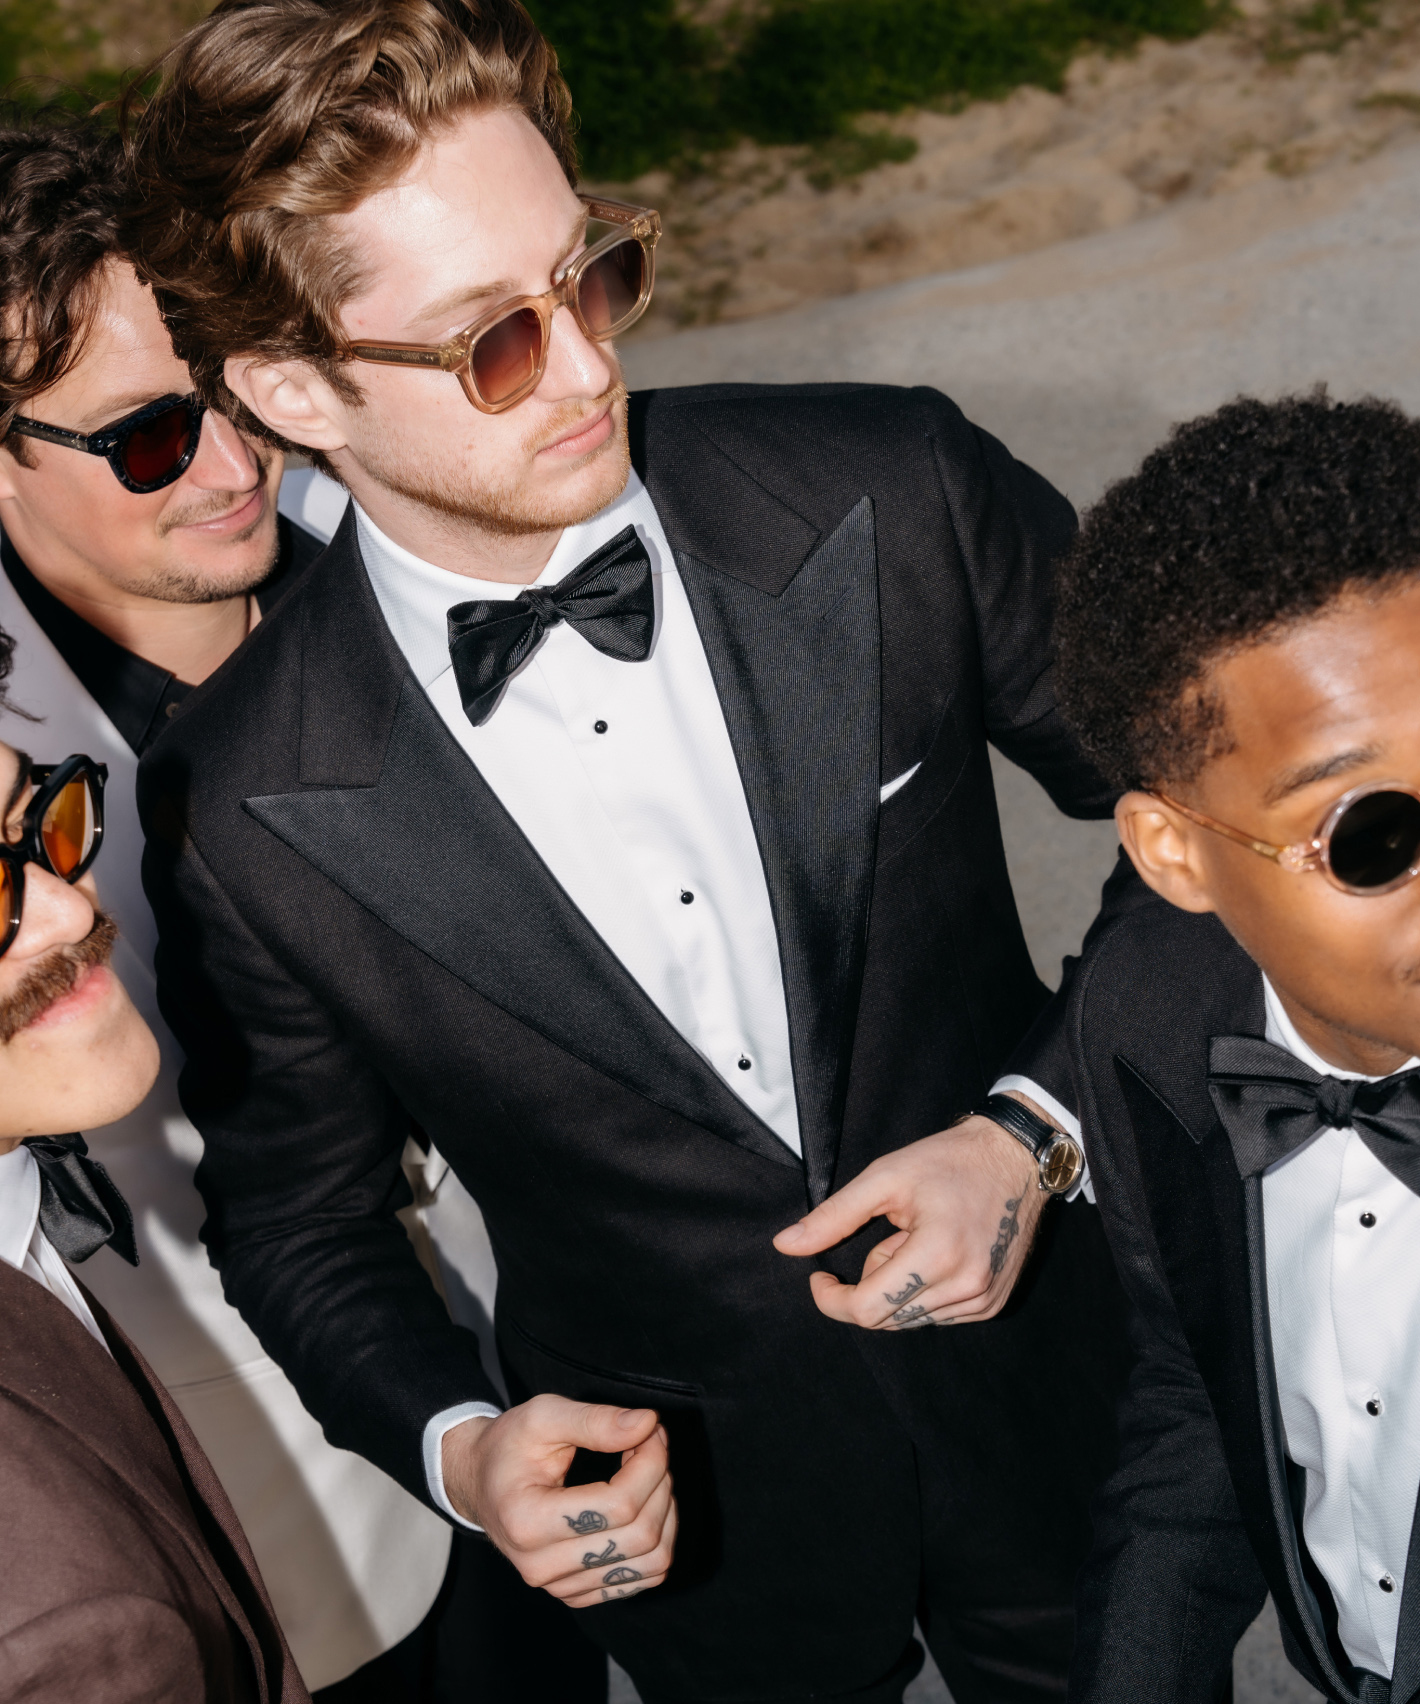 Different kind of wedding suits for men for various wedding dress codes, from blacktie tuxedos to three-piece suits available at Suitsupply. 